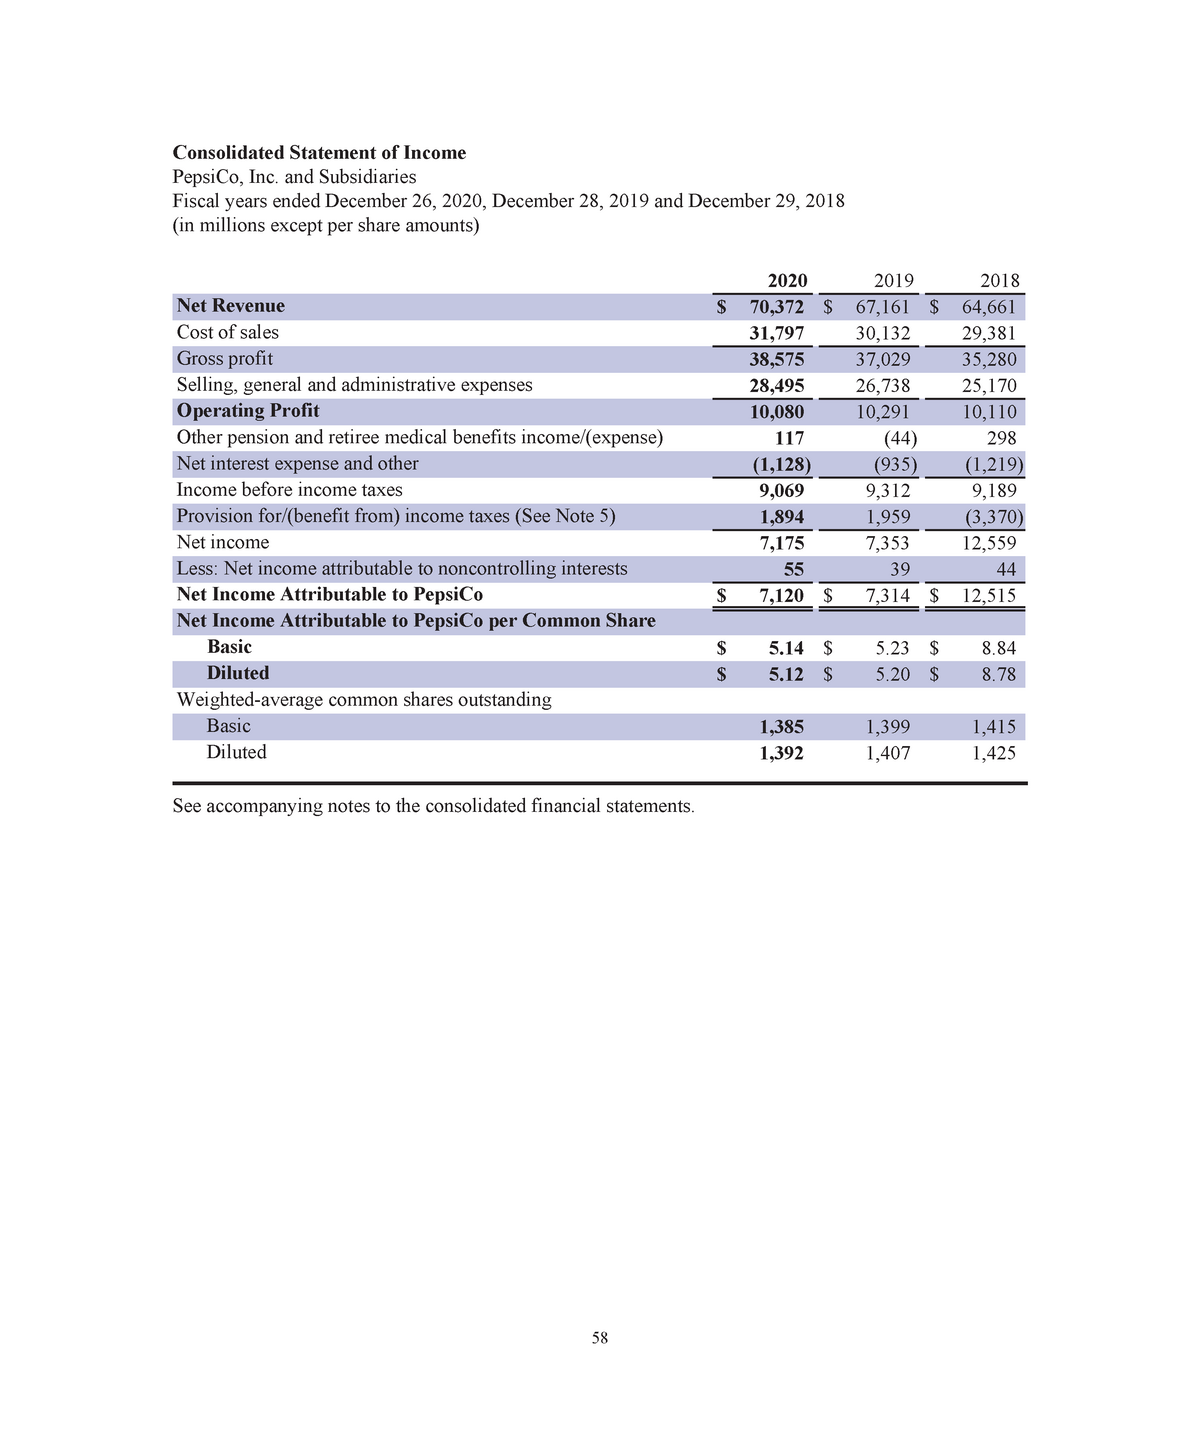 Pepsico inc 2020 annual report Consolidated Statement of